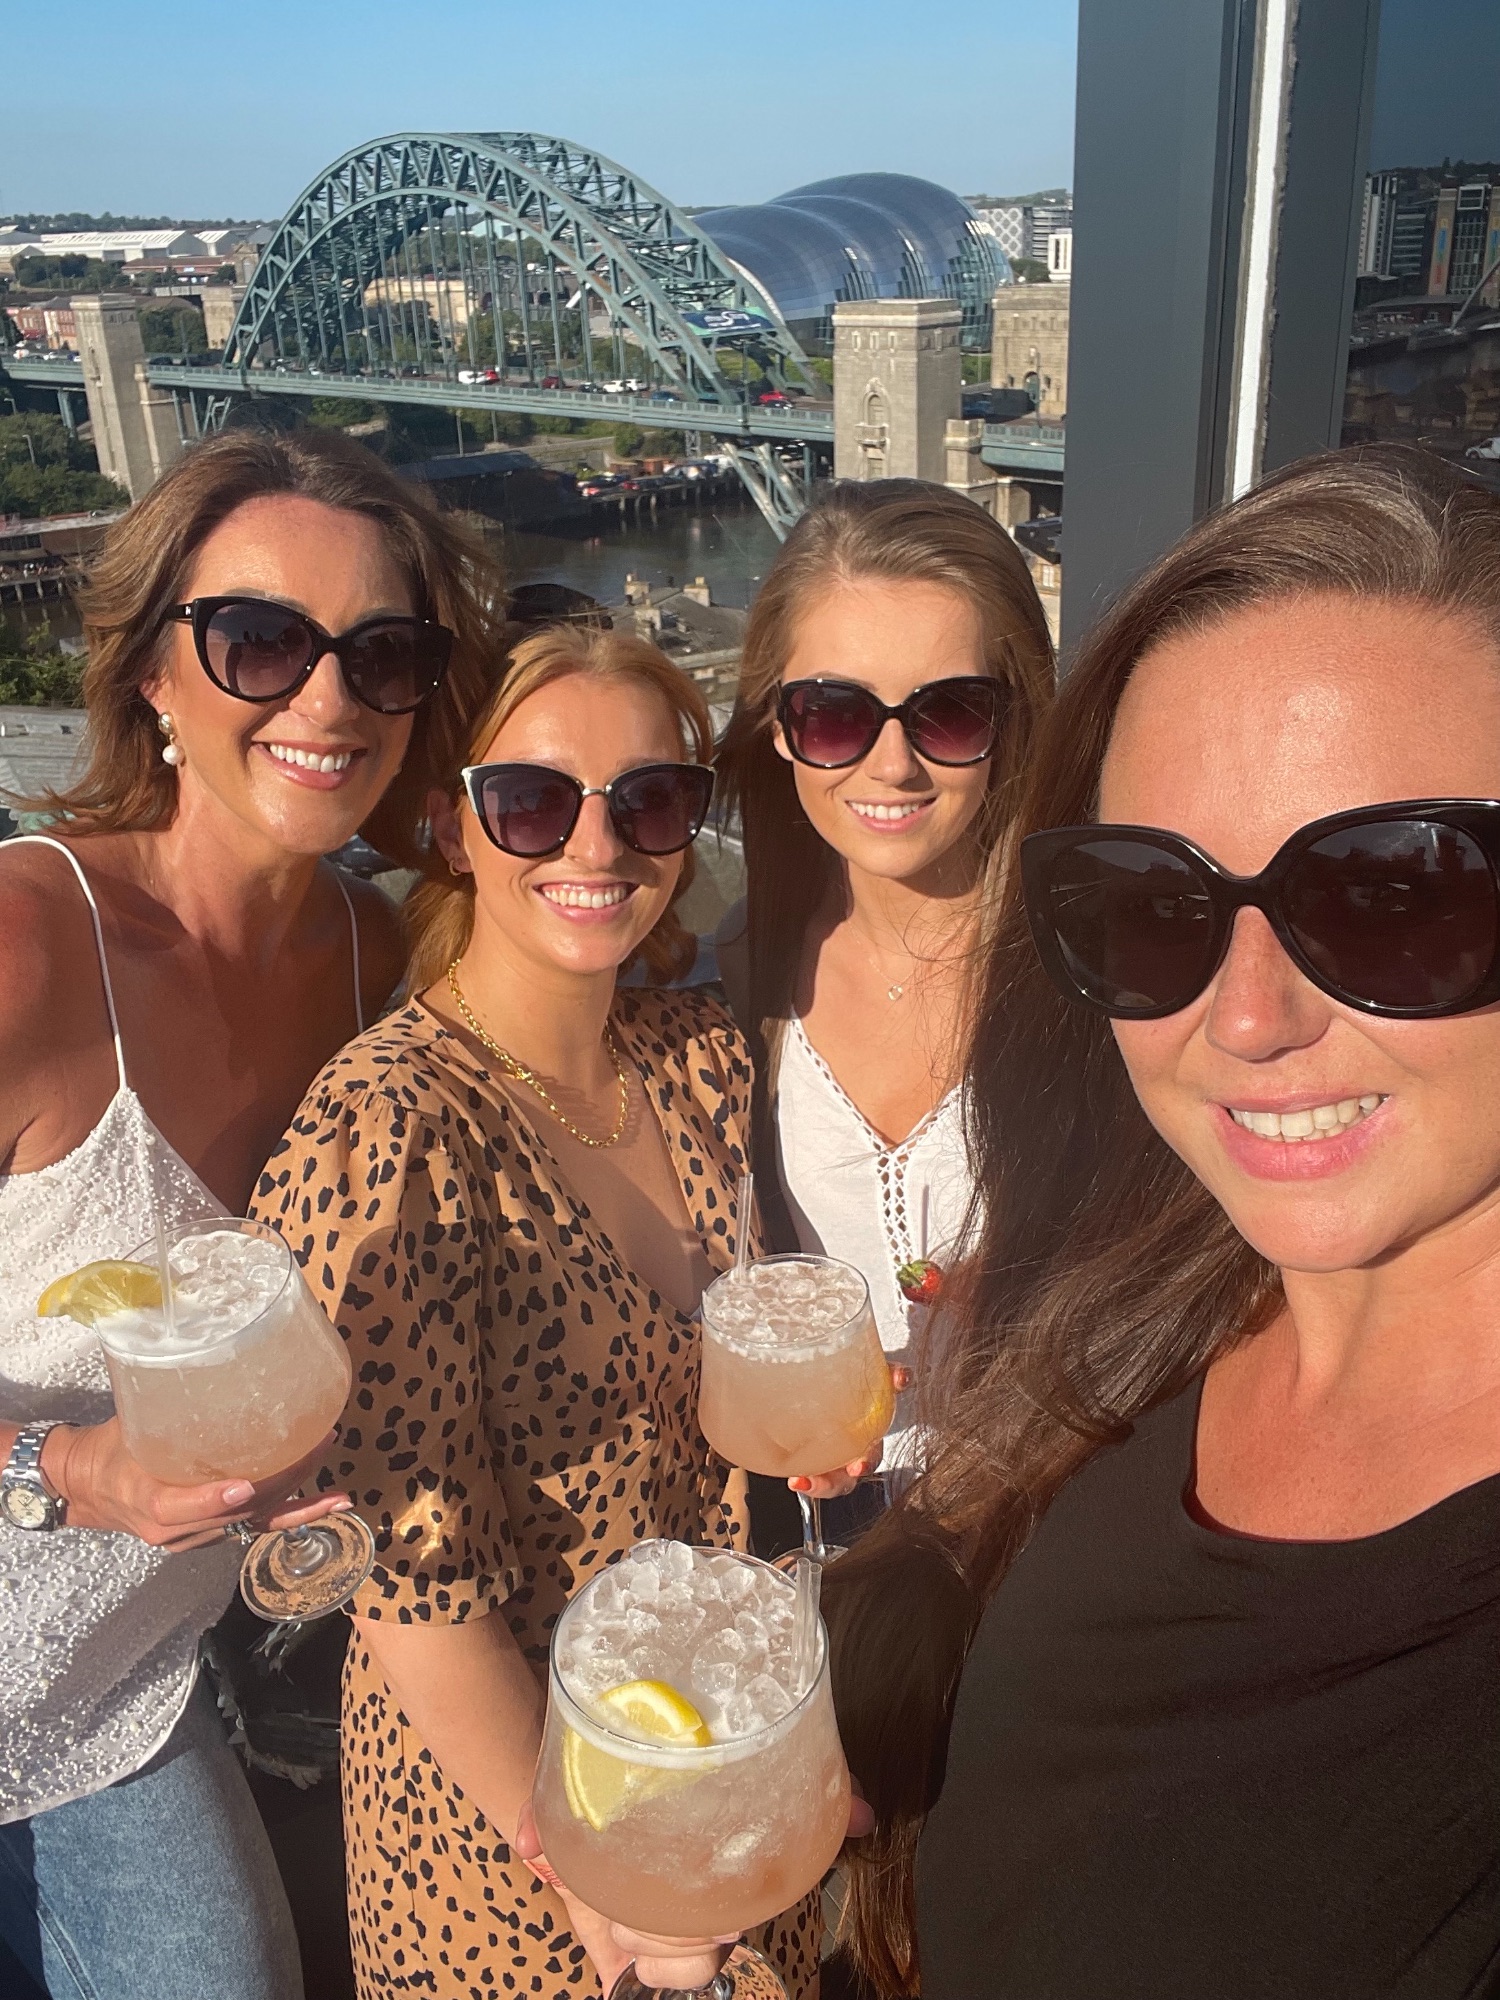 Four women smiling outside with drinks in hand.